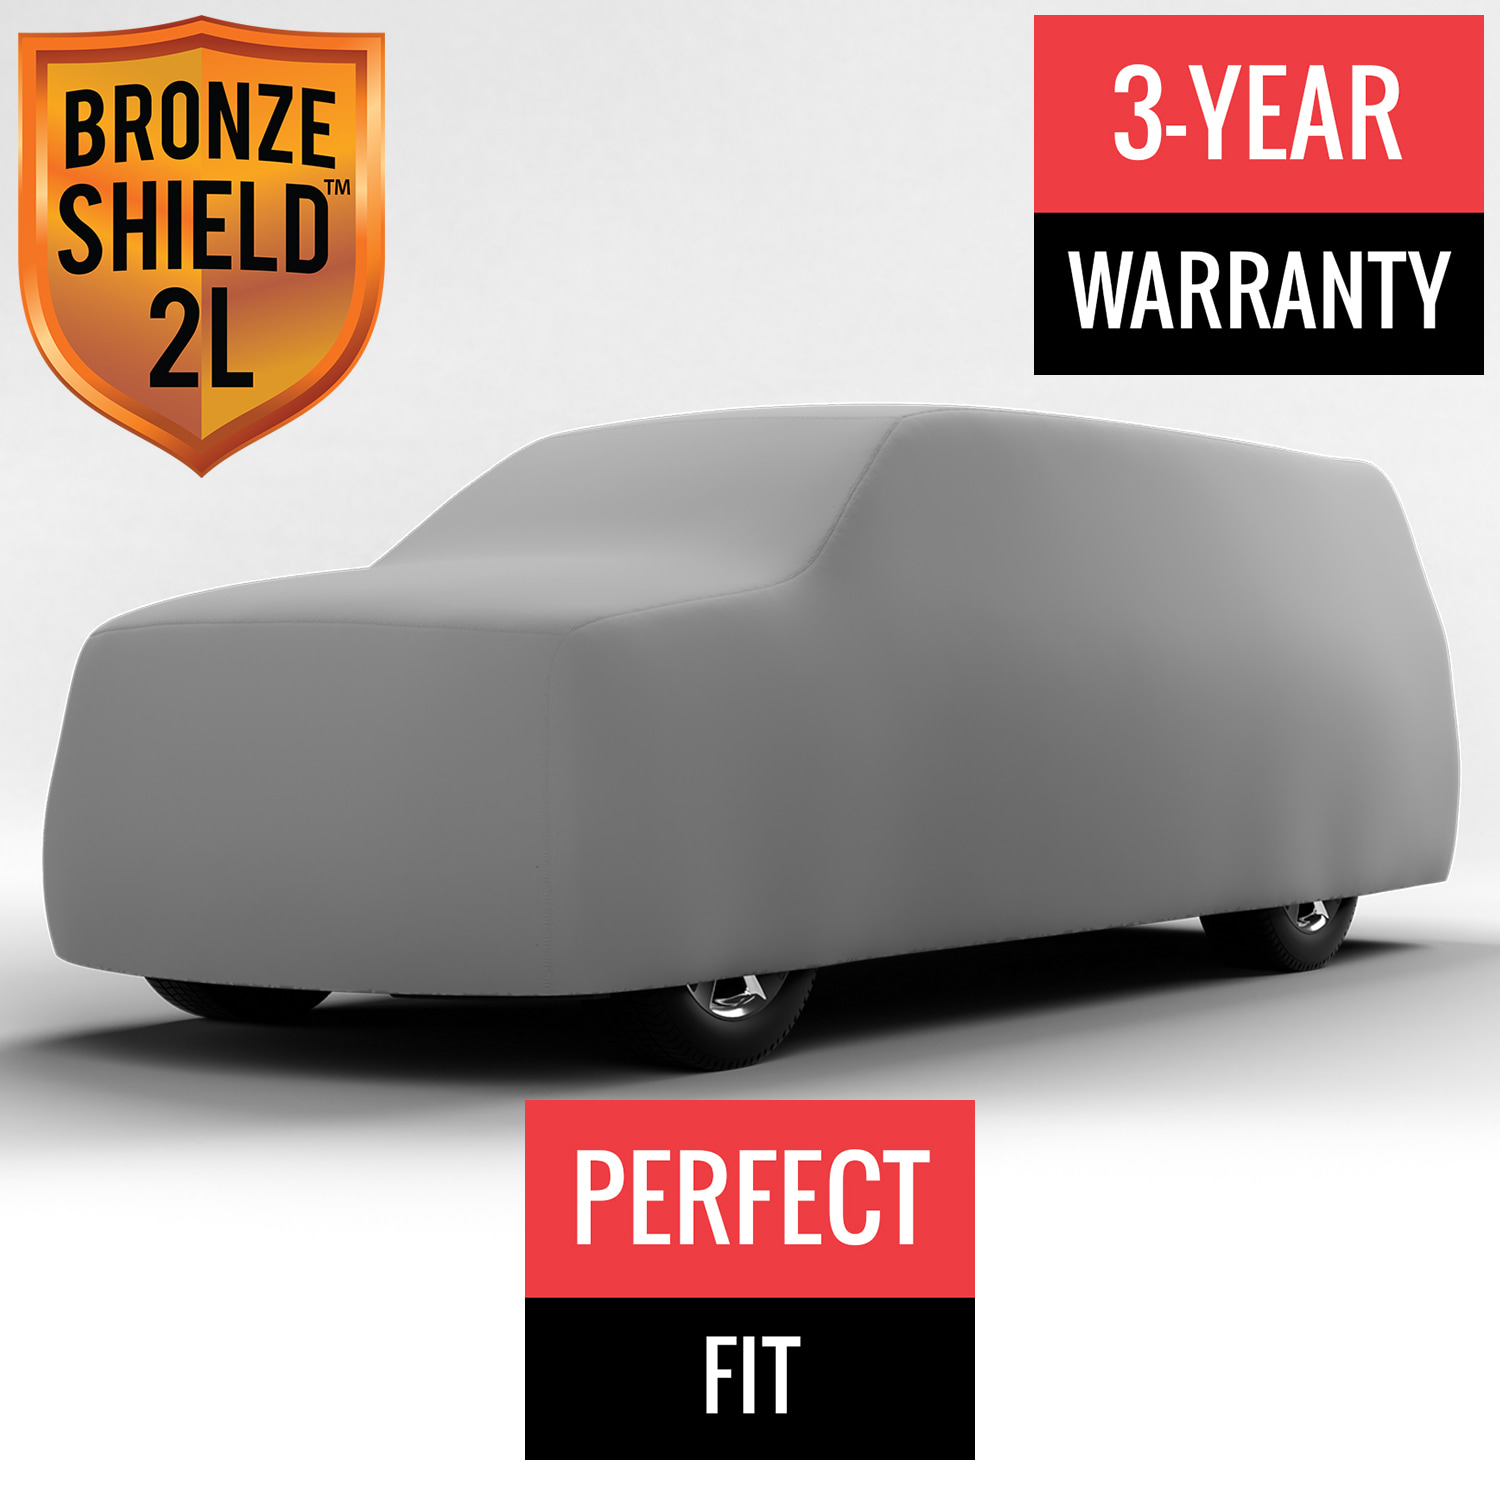 Bronze Shield 2L - Car Cover for GMC C1500 1997 Extended Cab Pickup 6.5 Feet Bed with Camper Shell